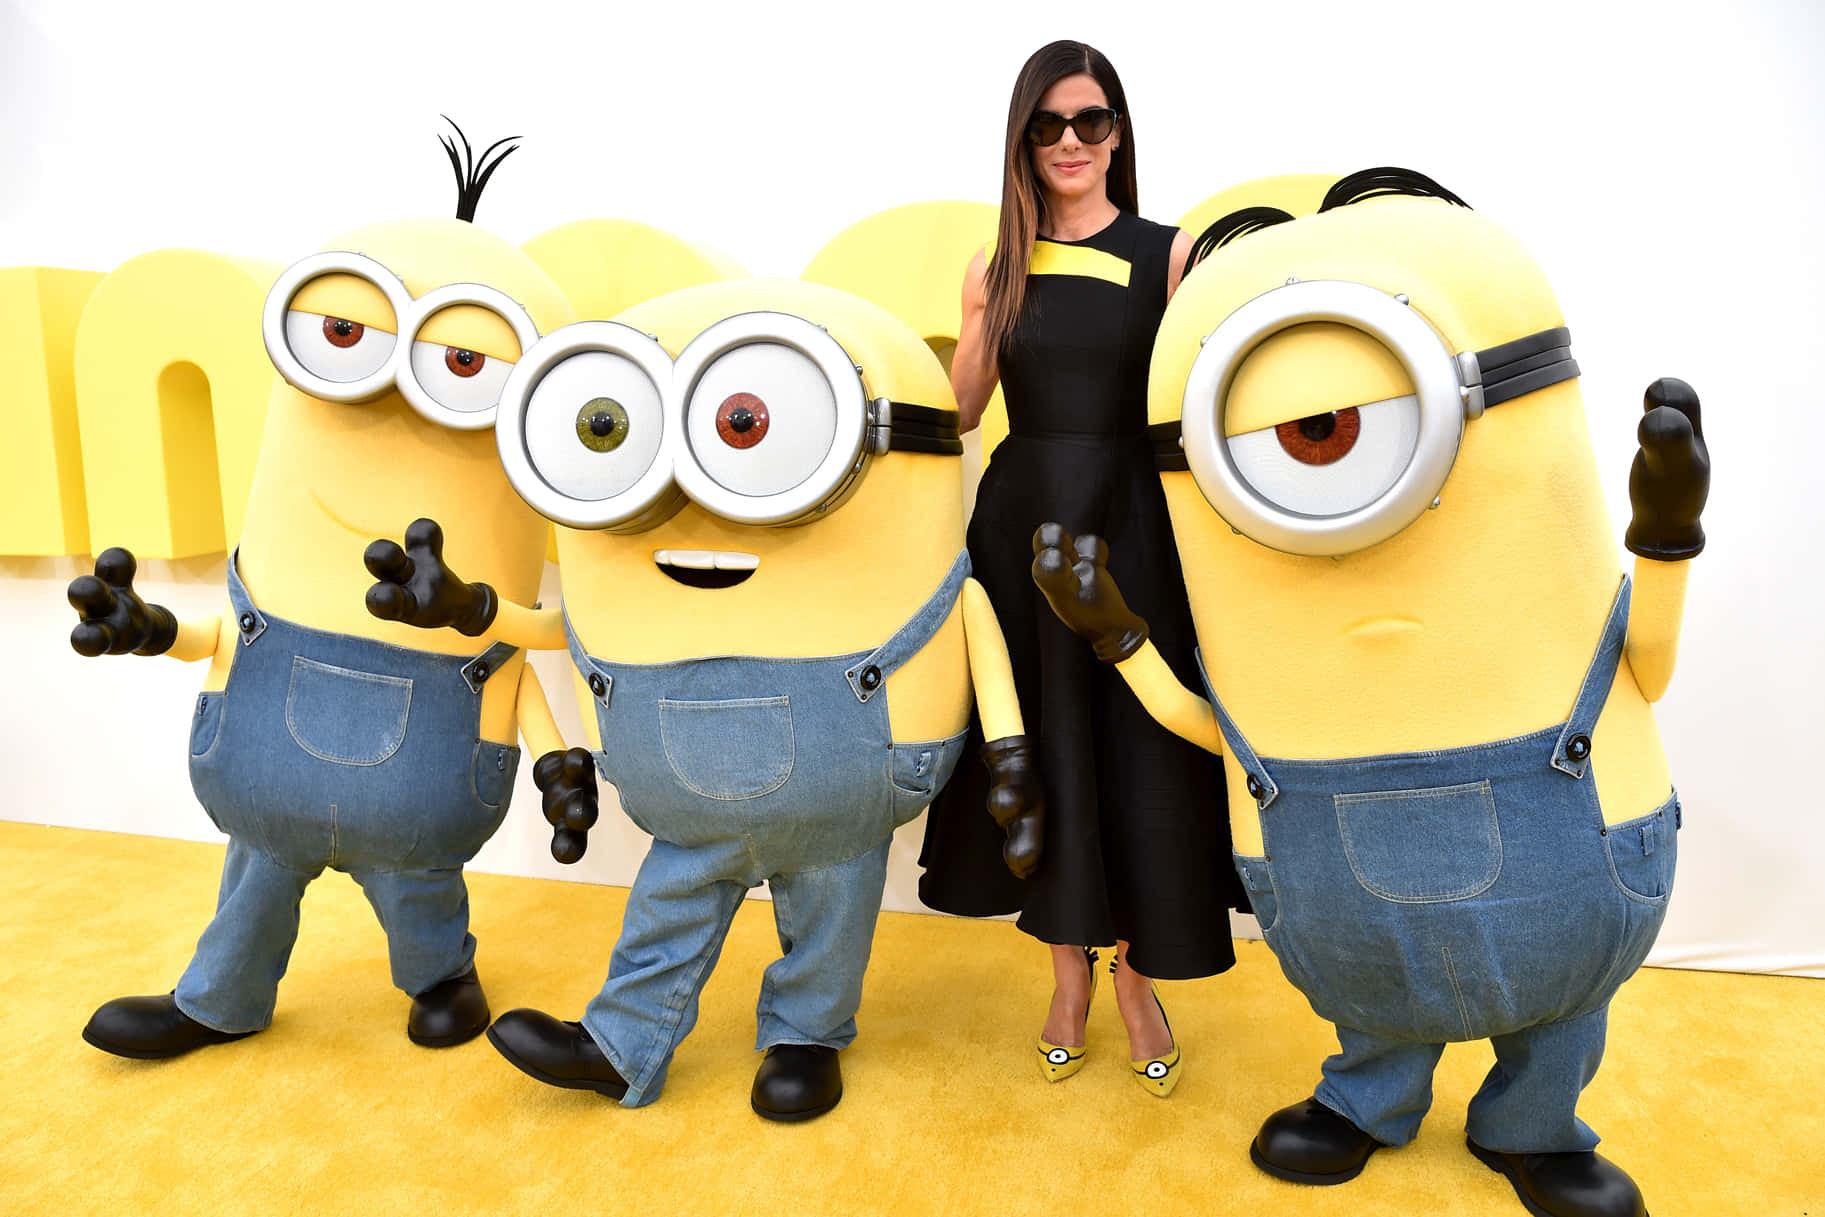 “Gearing Up With The Minions”